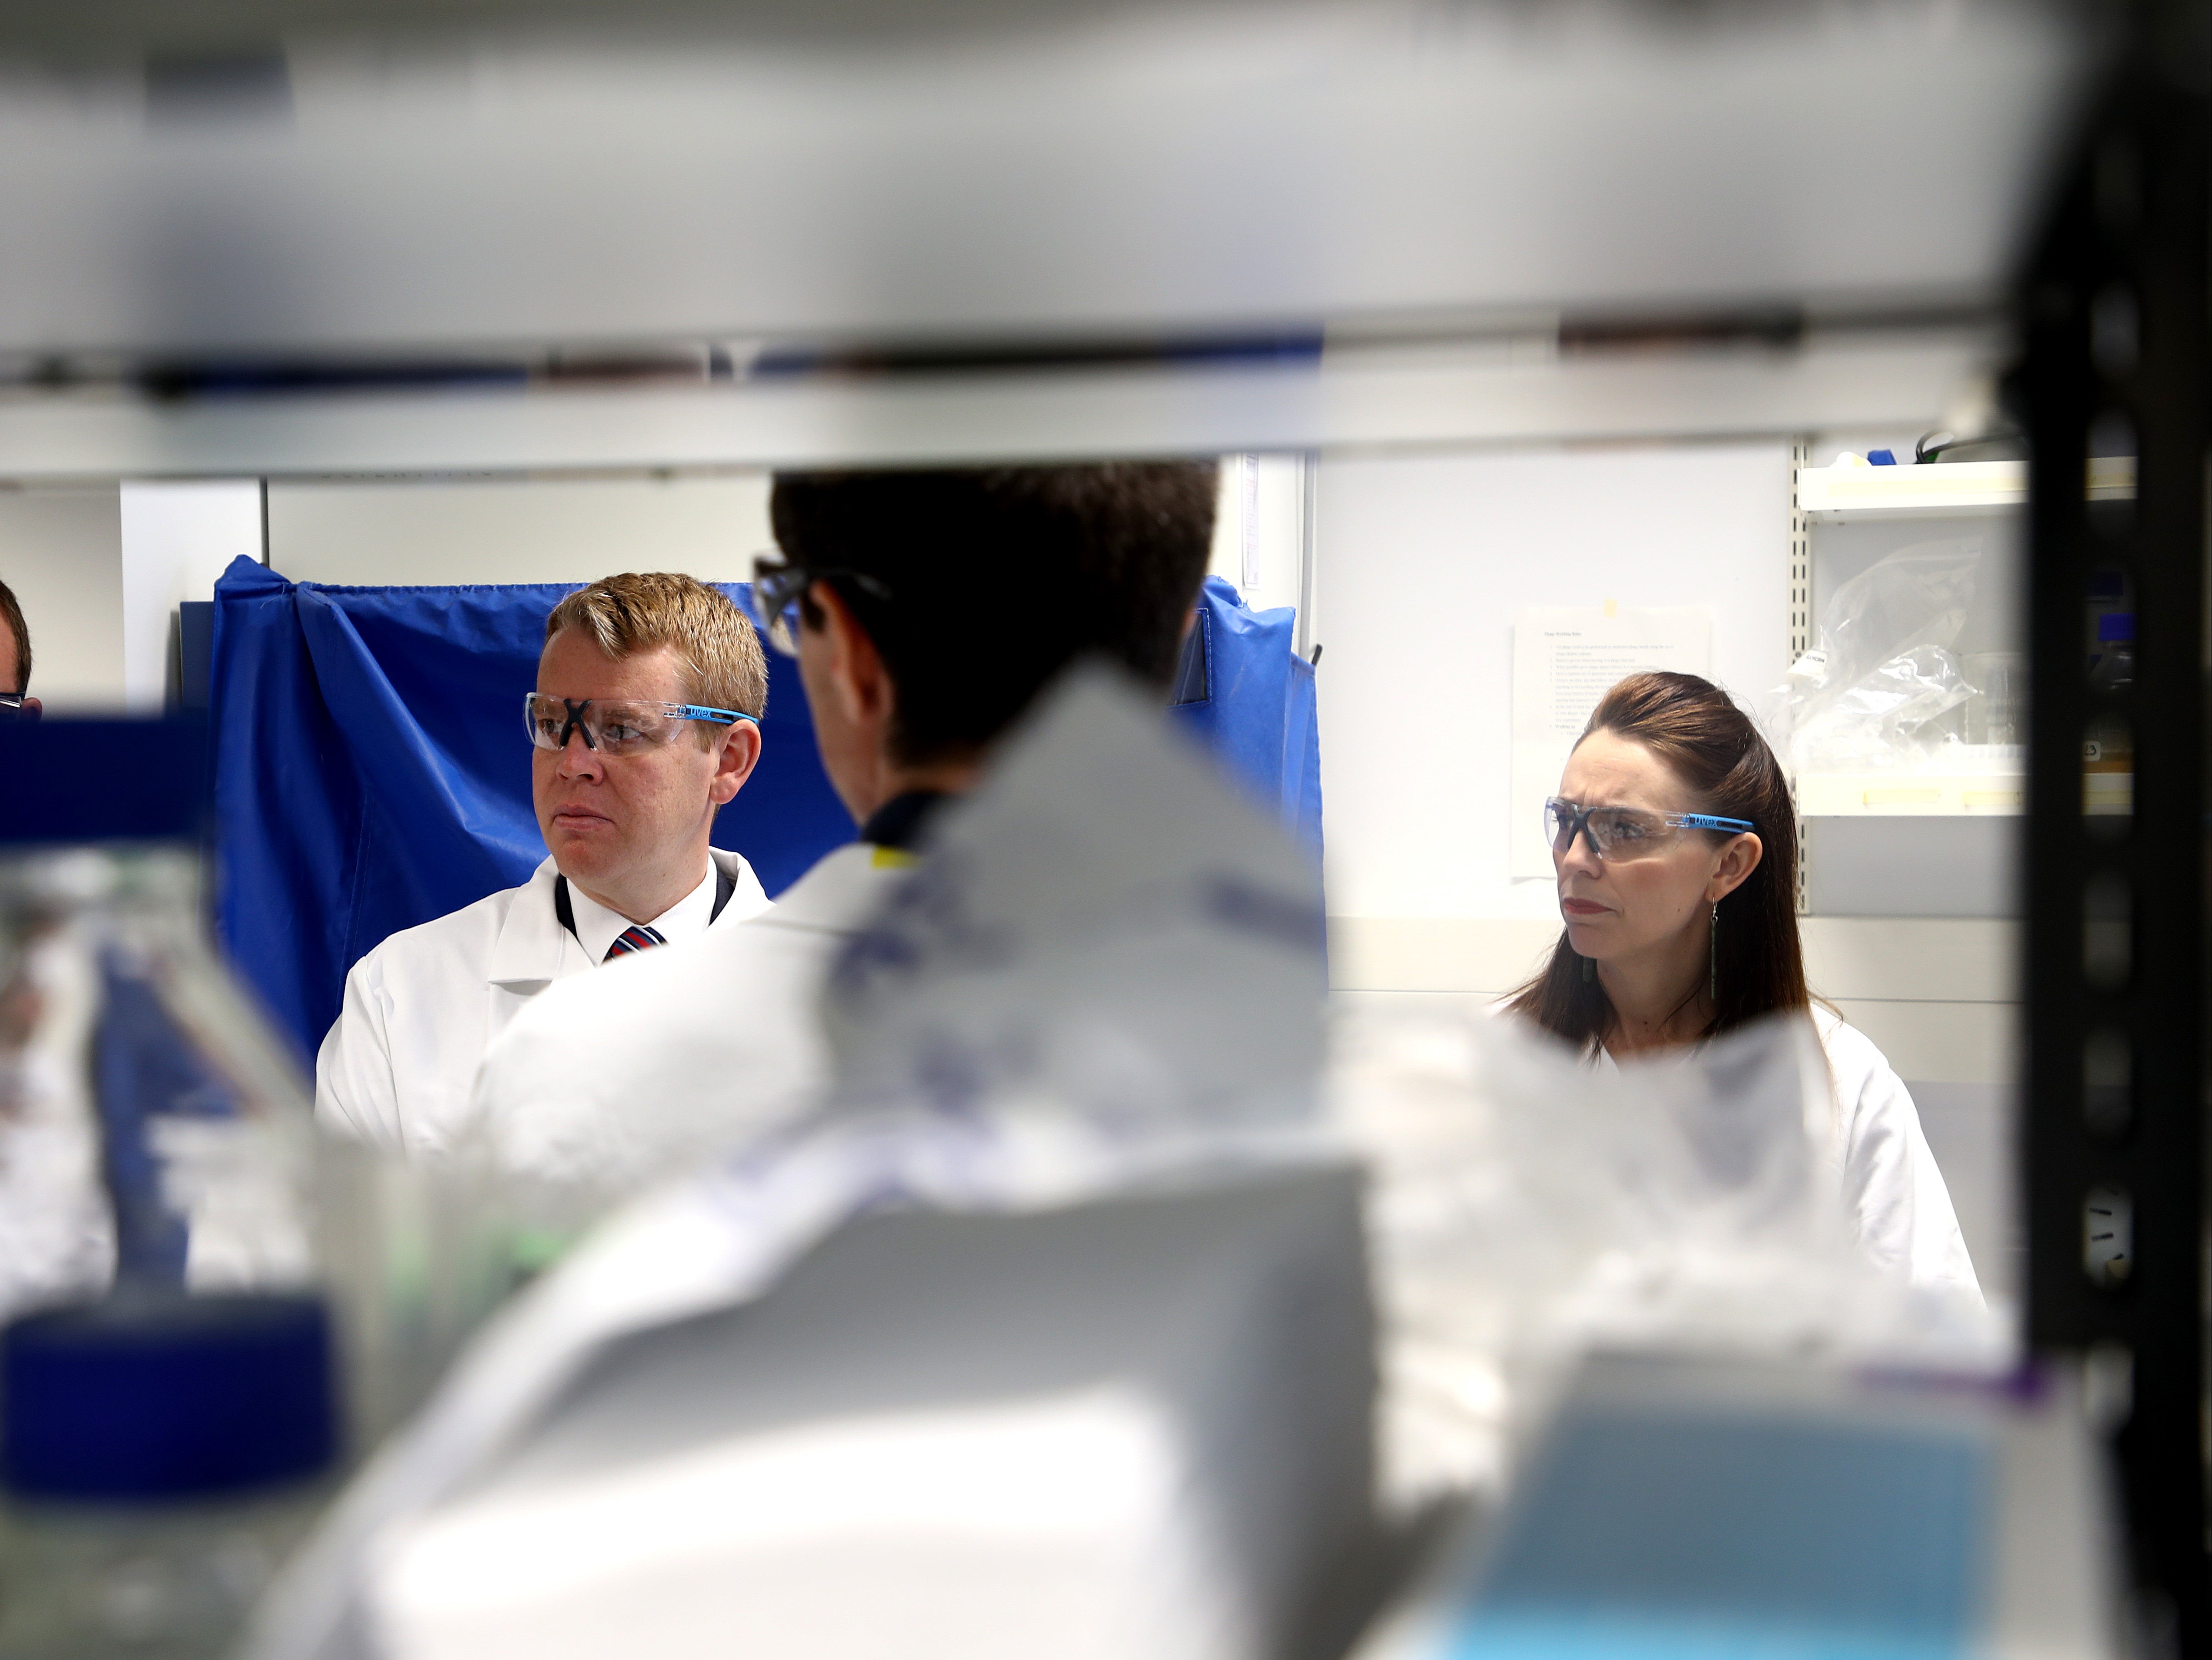 Jacinda Ardern and Covid-19 response minister Chris Hipkins visit a lab at Auckland University after announcing they have secured enough vaccine doses to immunise the whole population